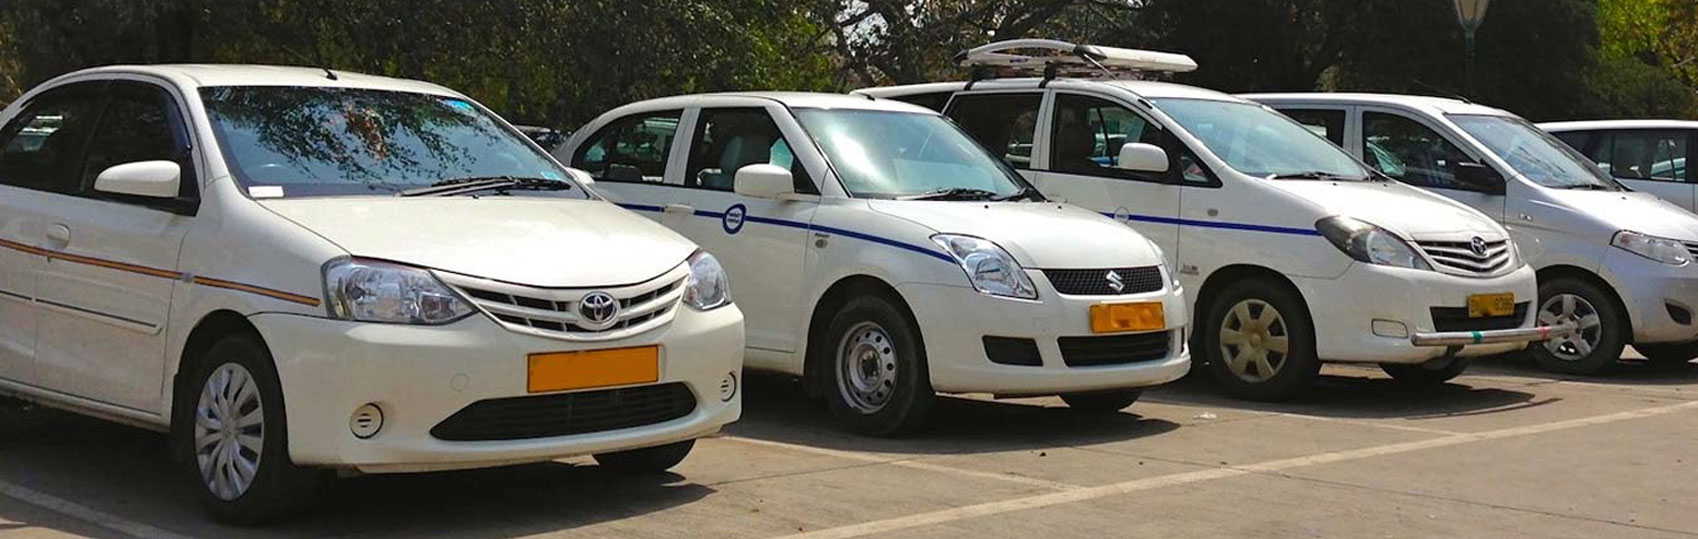 Taxi Services in Agra